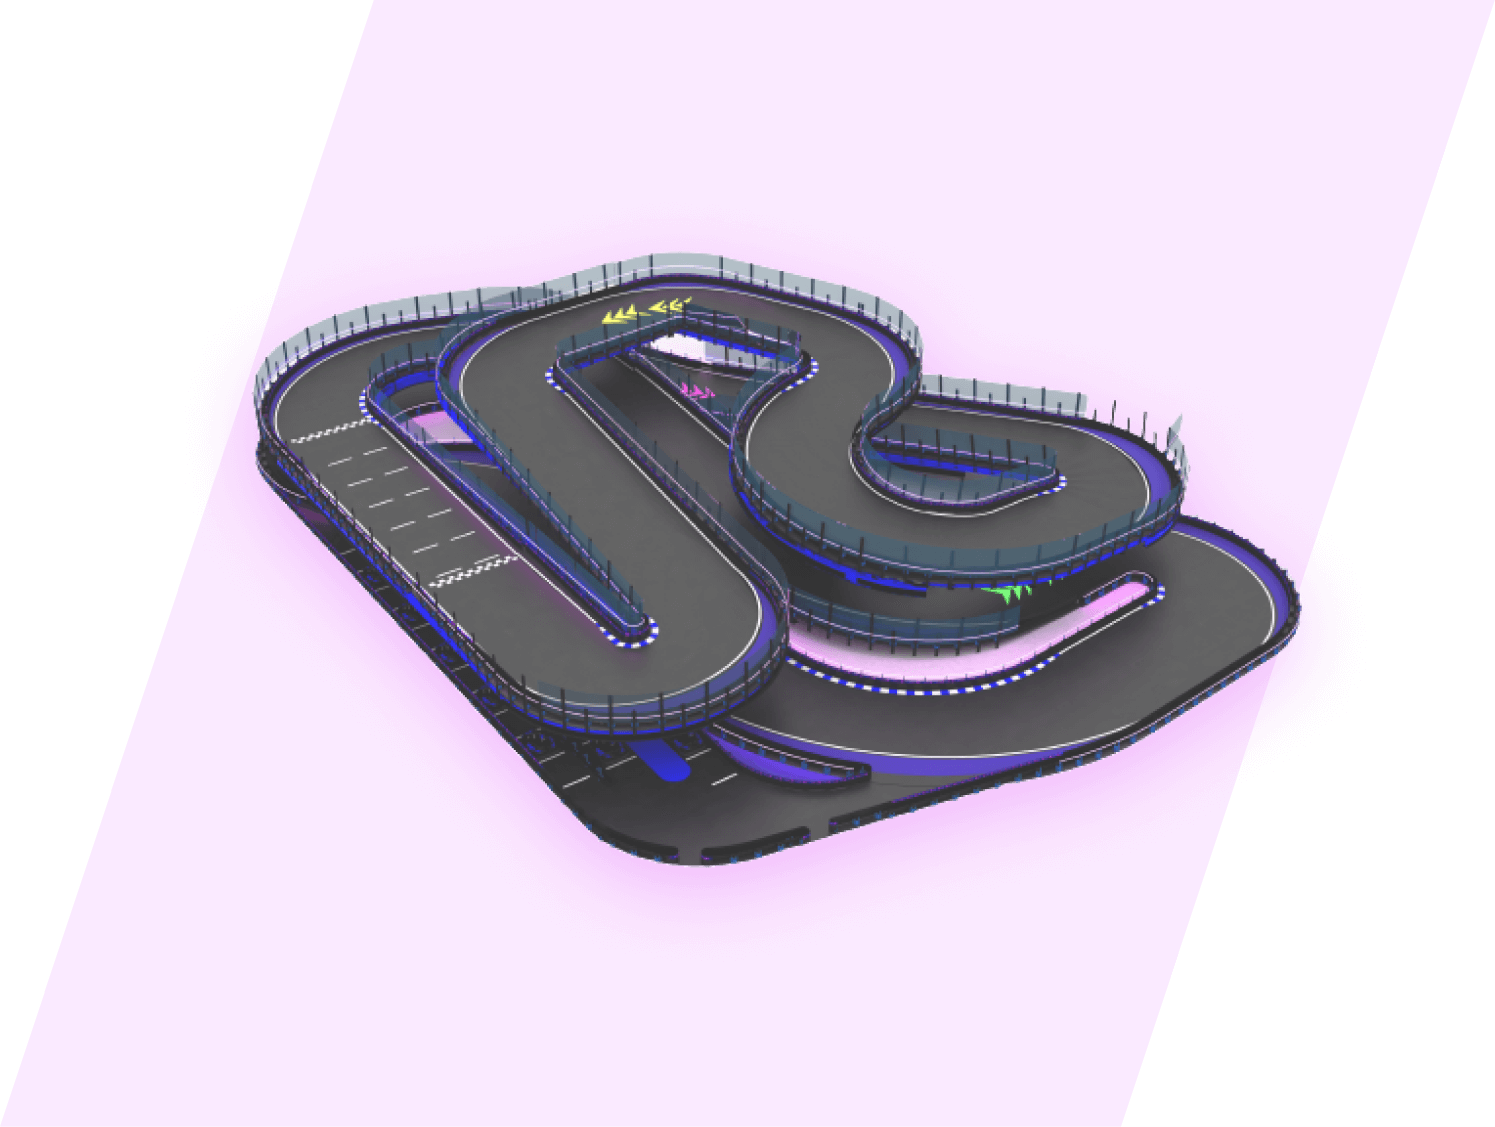 3-level indoor track with 14 exciting turns